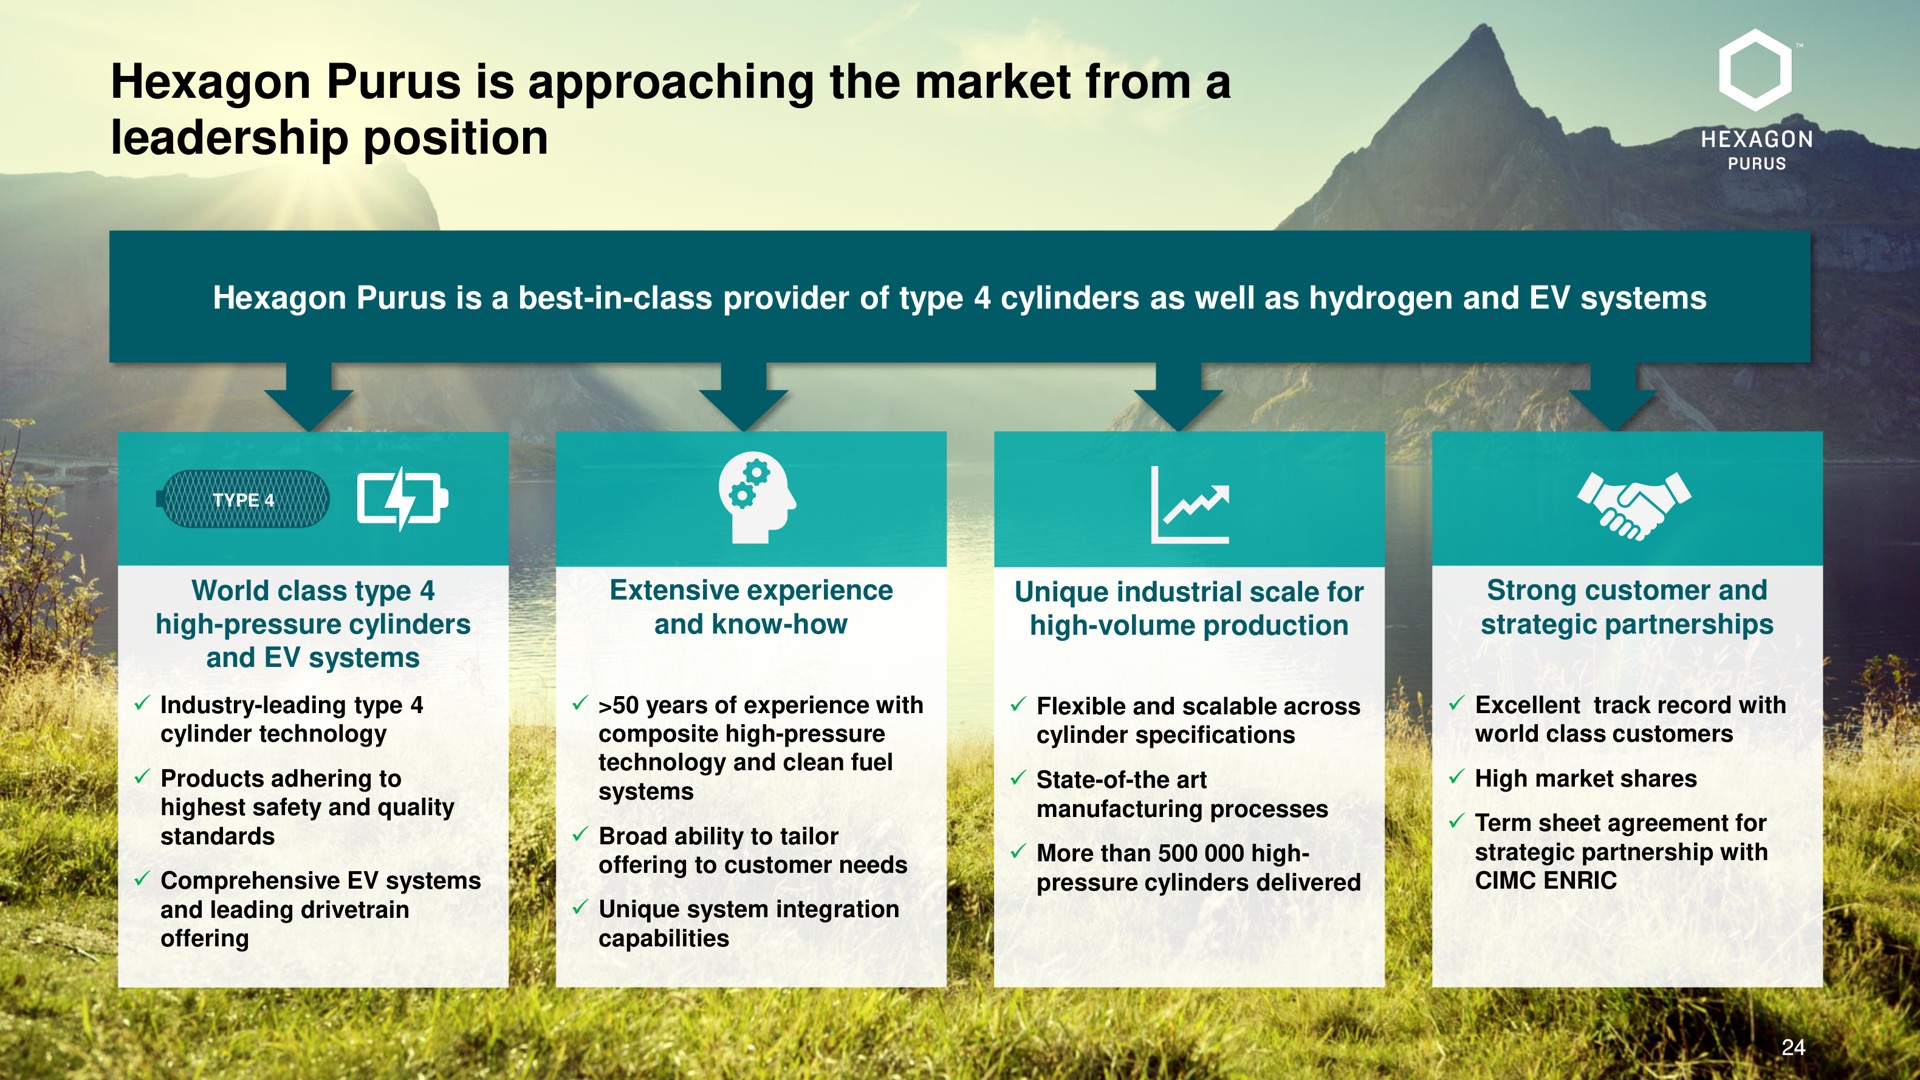 hexagon is approaching the market from a leadership position | Hexagon Purus